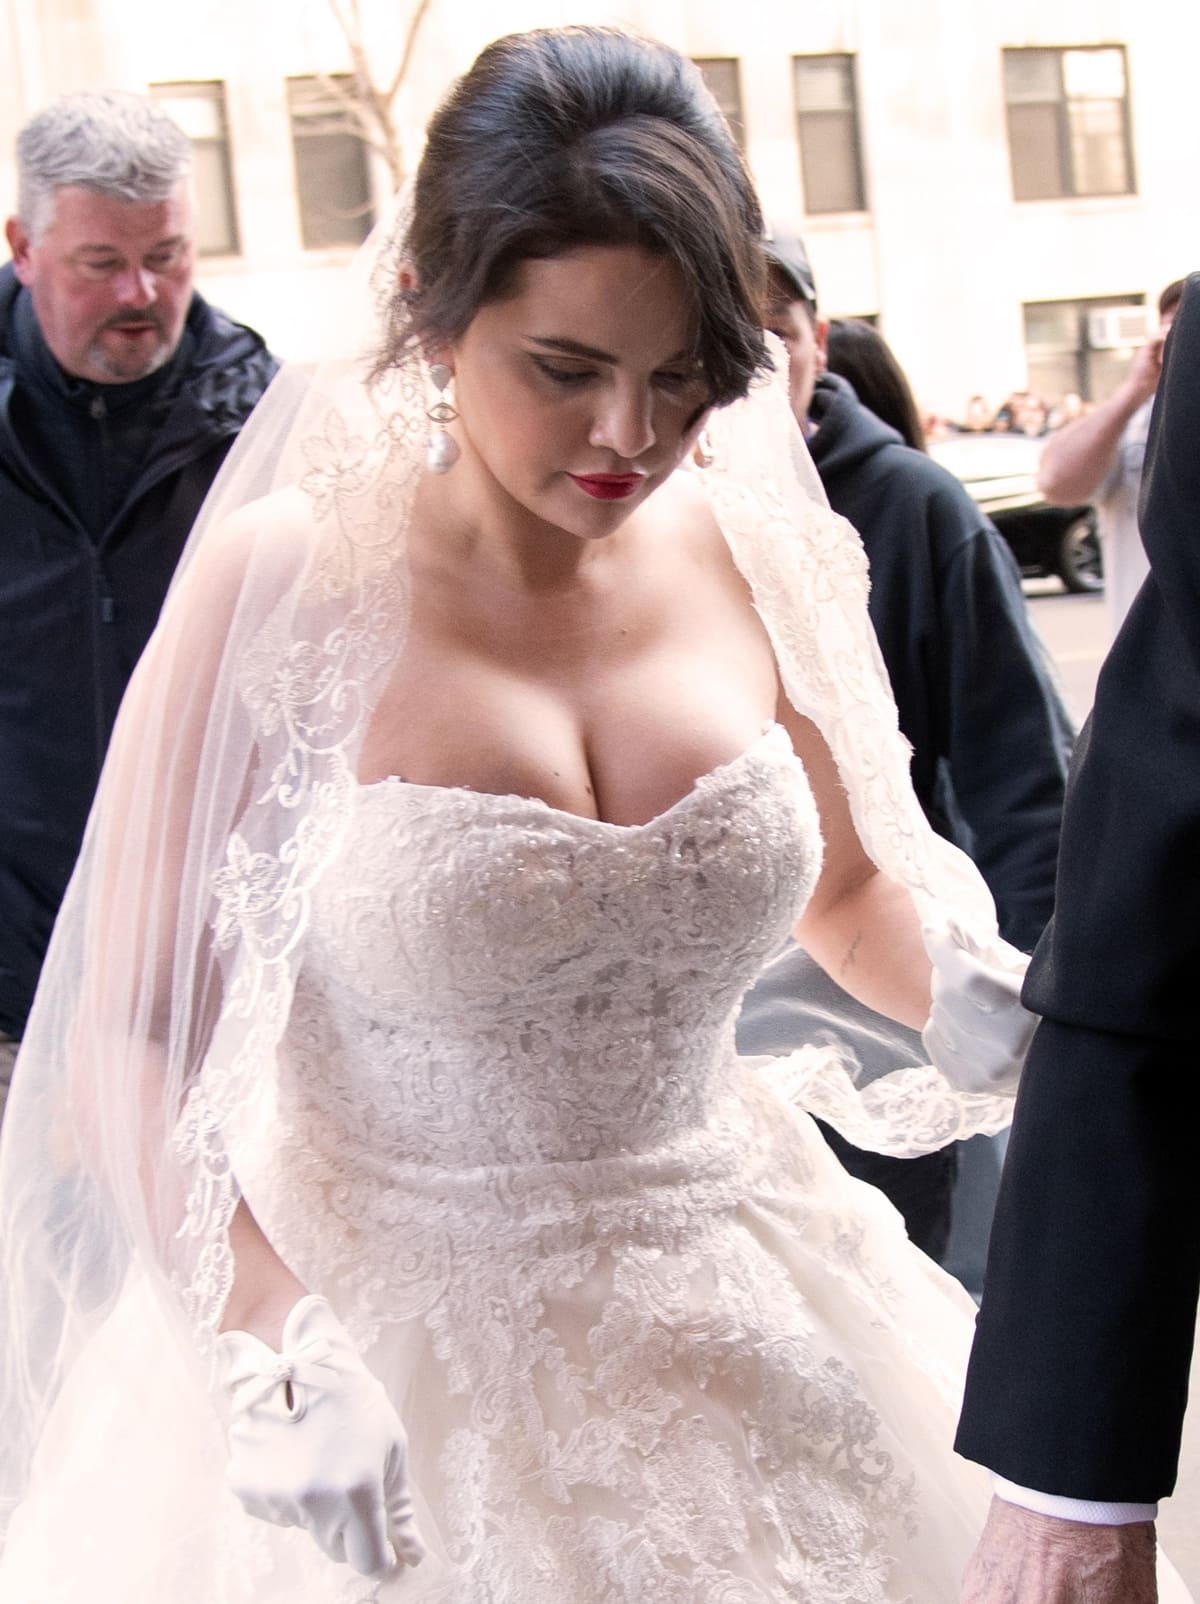 Selena Gomez flaunts cleavage in a beautiful ball gown-style wedding dress with a strapless sweetheart neckline, voluminous skirt, and delicate lace, which she paired with a matching floor-length lace veil, white gloves, pearl drop earrings, and a side-parted updo, completed with a cherry red lip